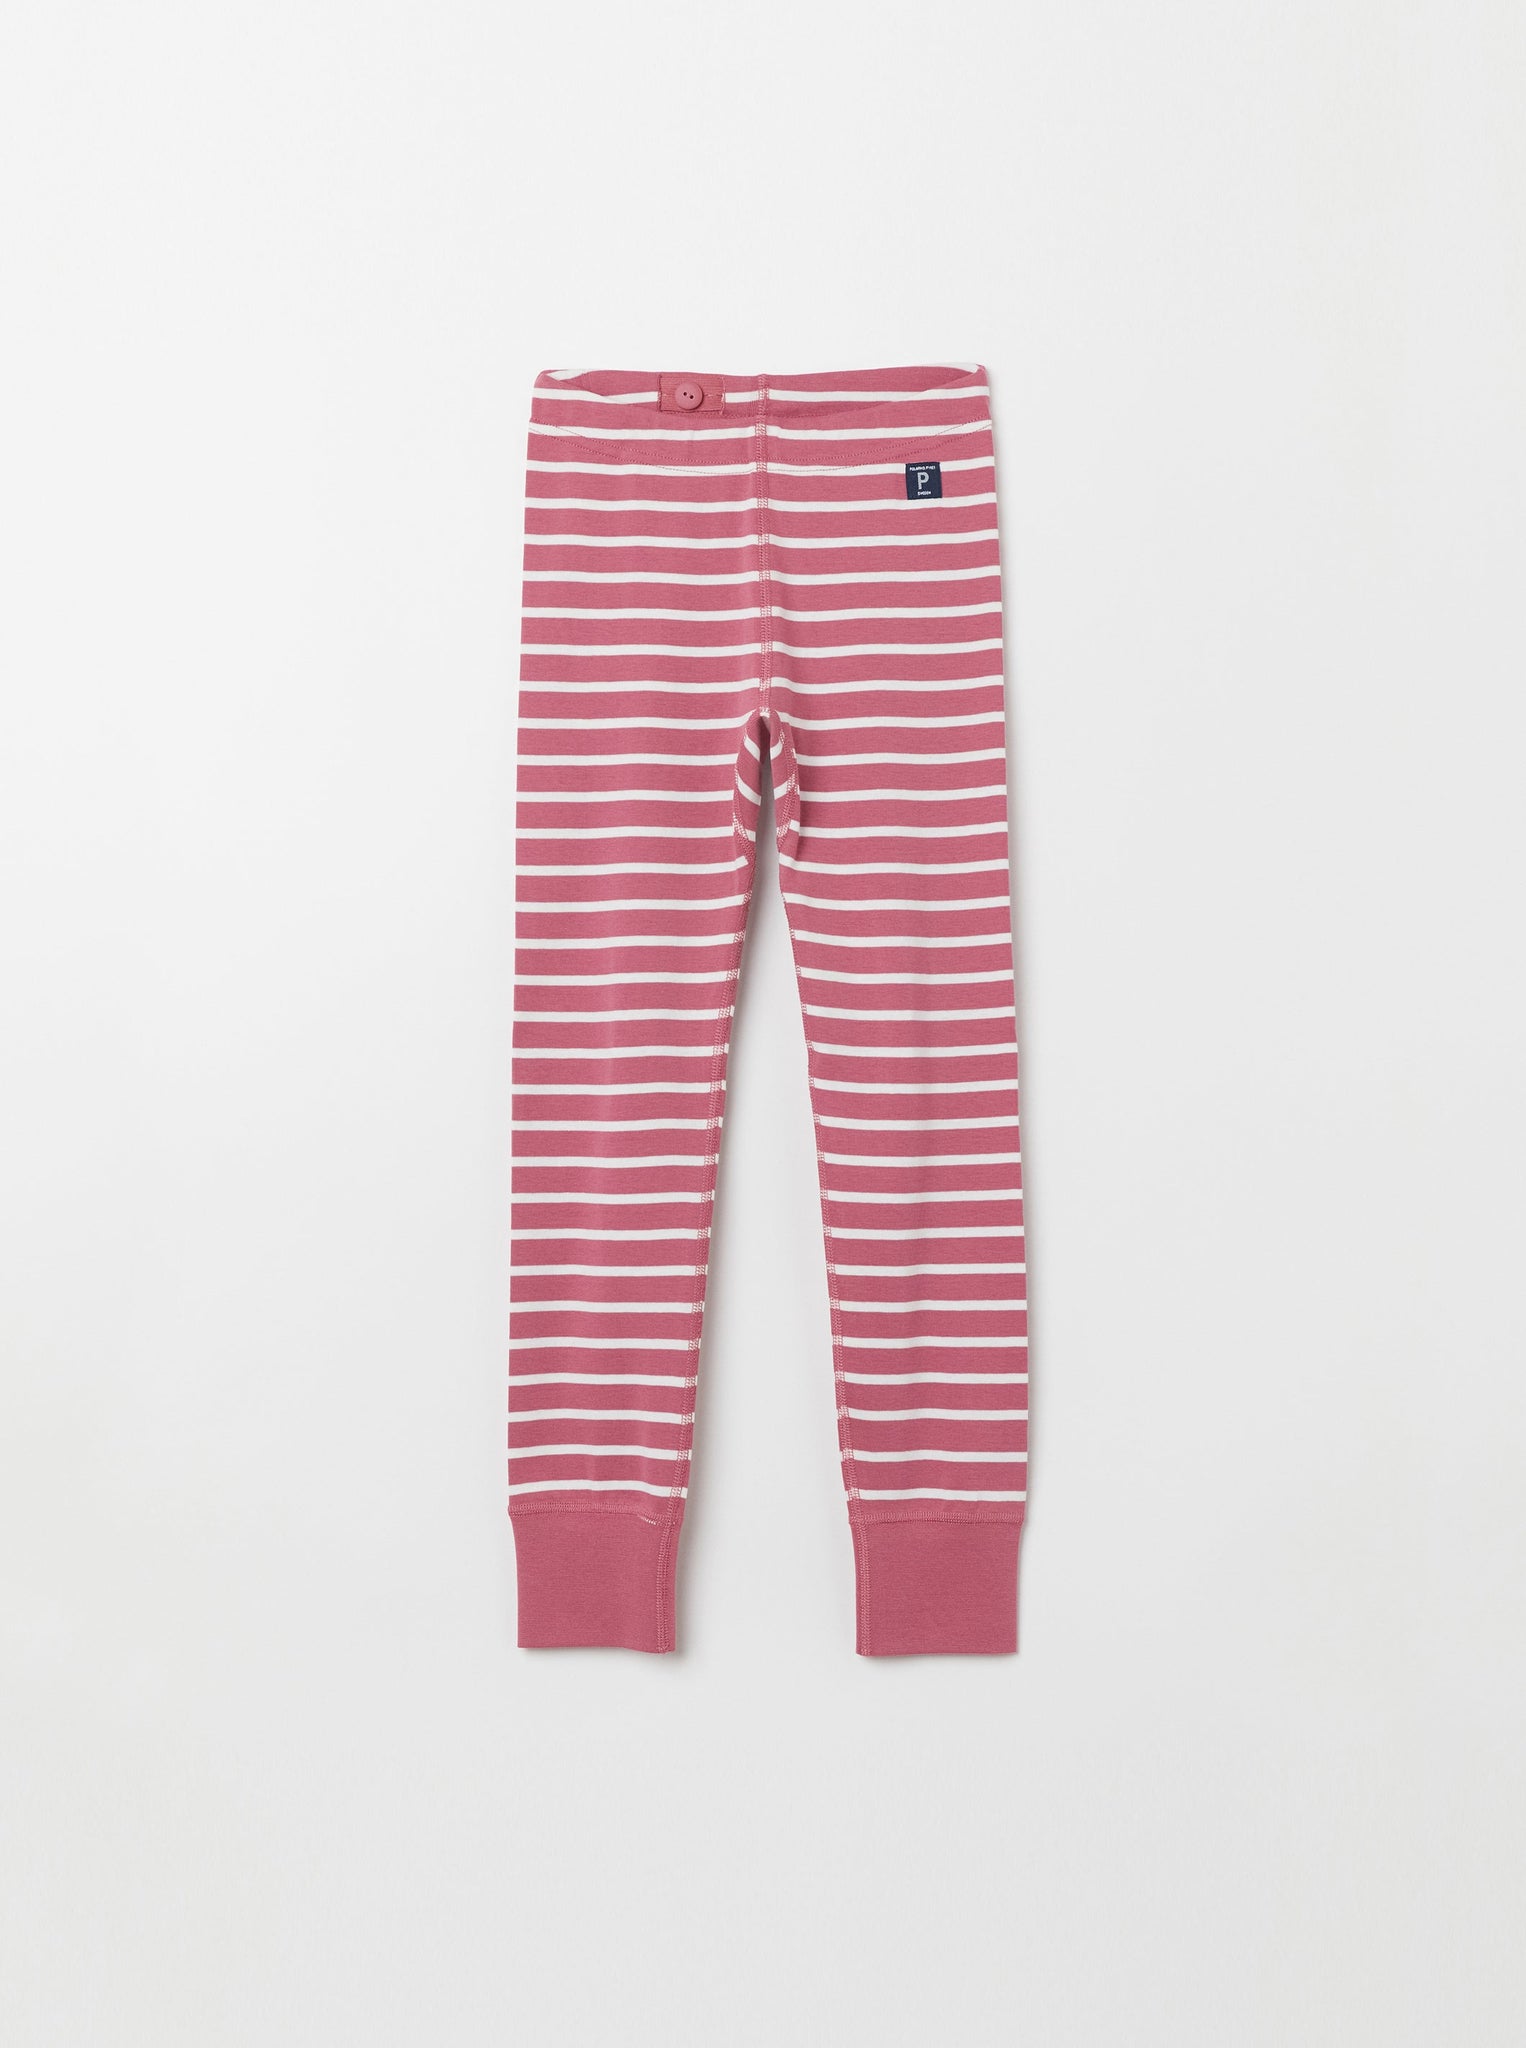 Organic Cotton Pink Kids Leggings from the Polarn O. Pyret Kidswear collection. Clothes made using sustainably sourced materials.